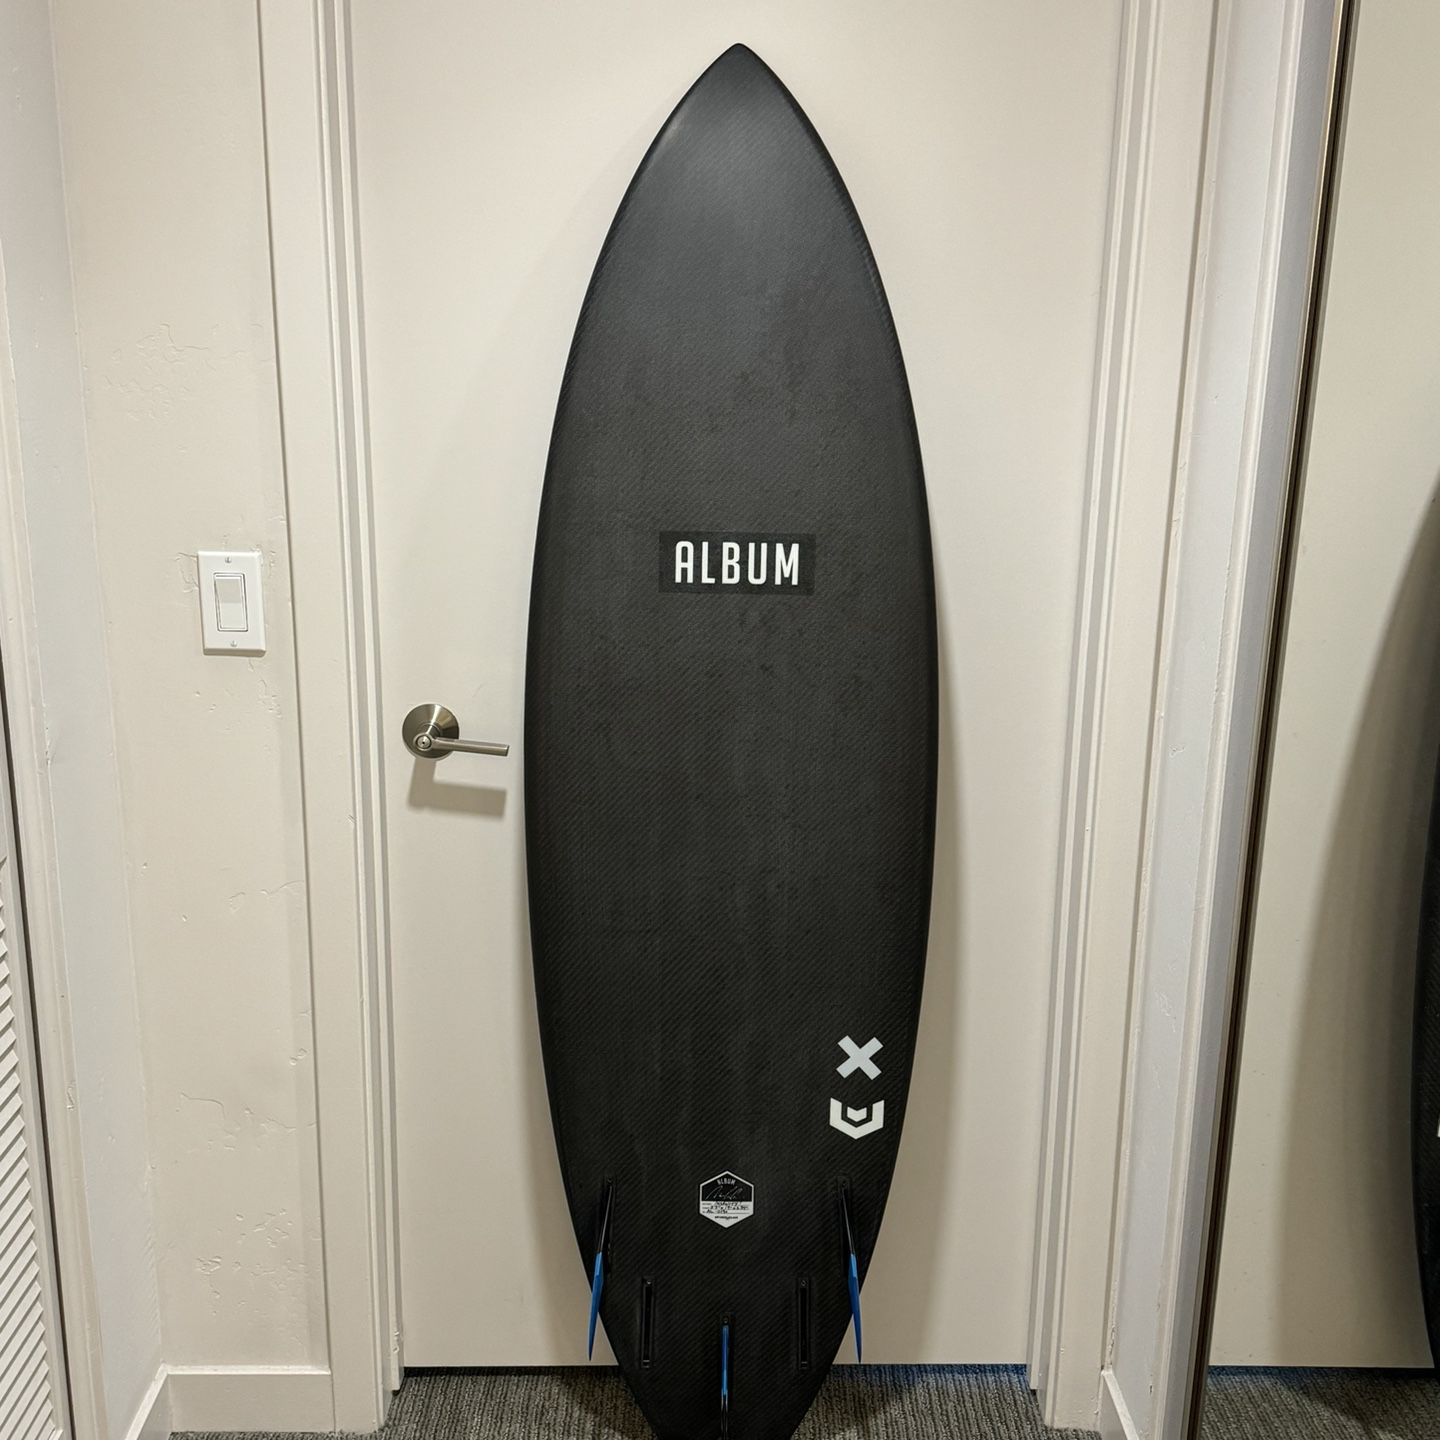 Album Insanity (Varial Foam Carbon Wrapped) Surfboard